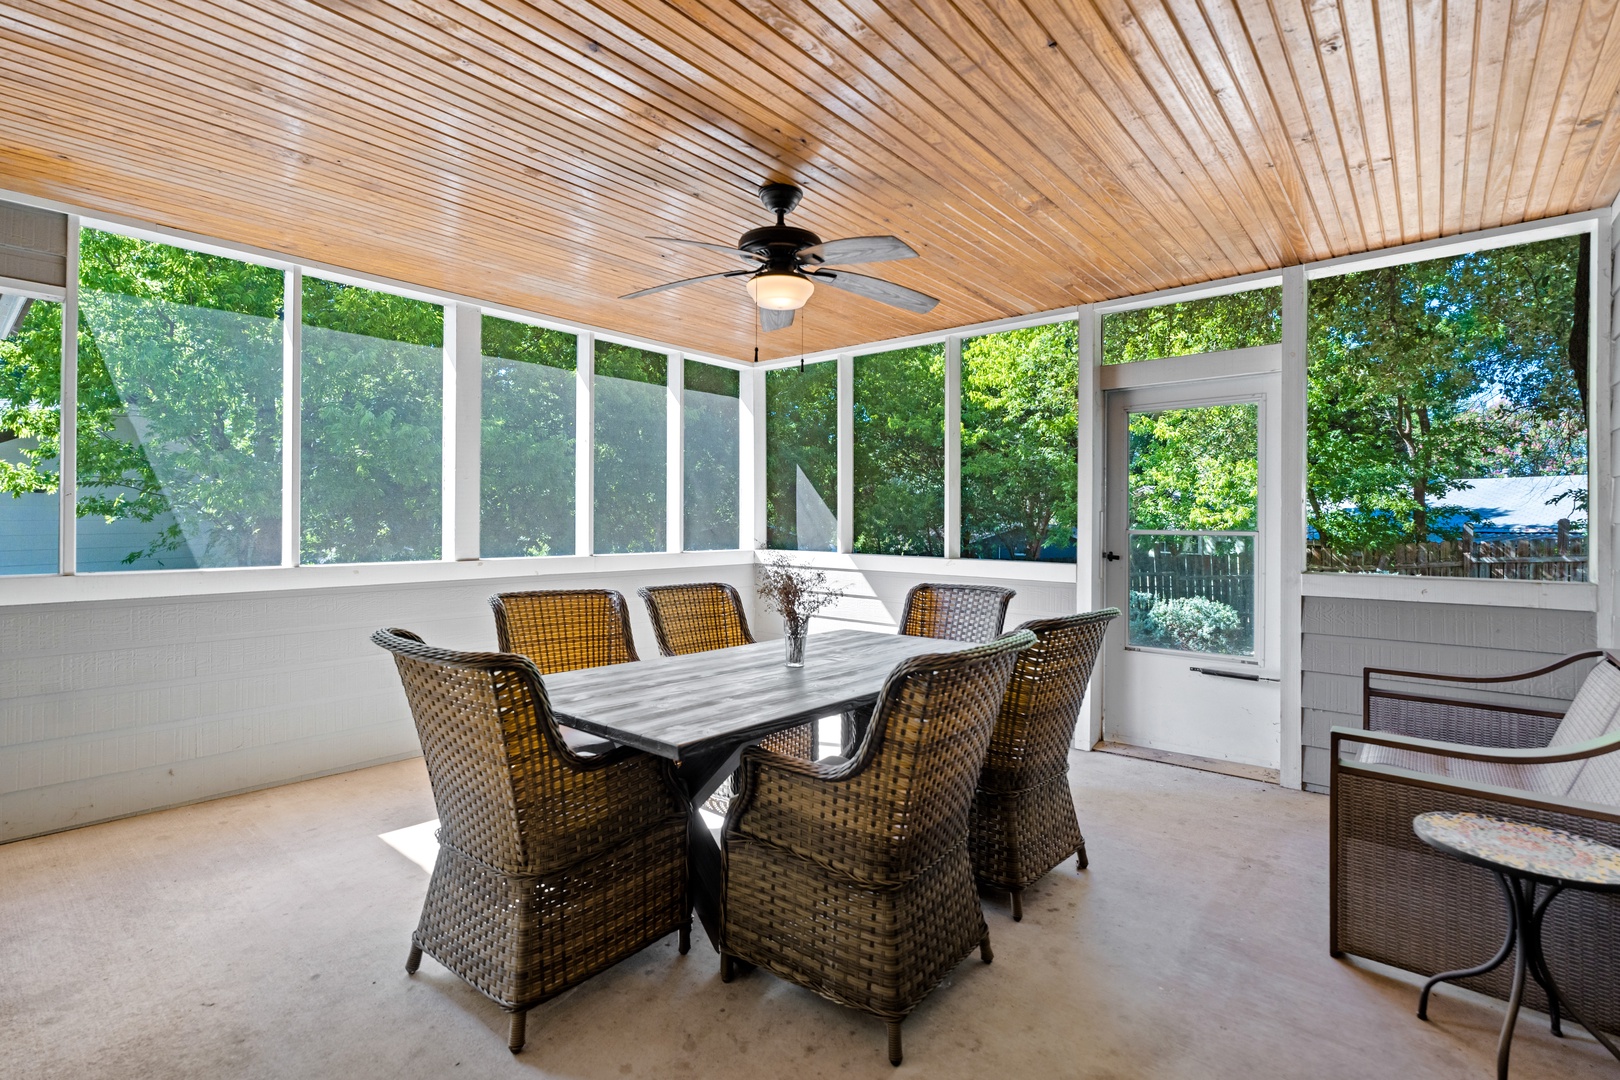 Screened porch with table and seating for 6